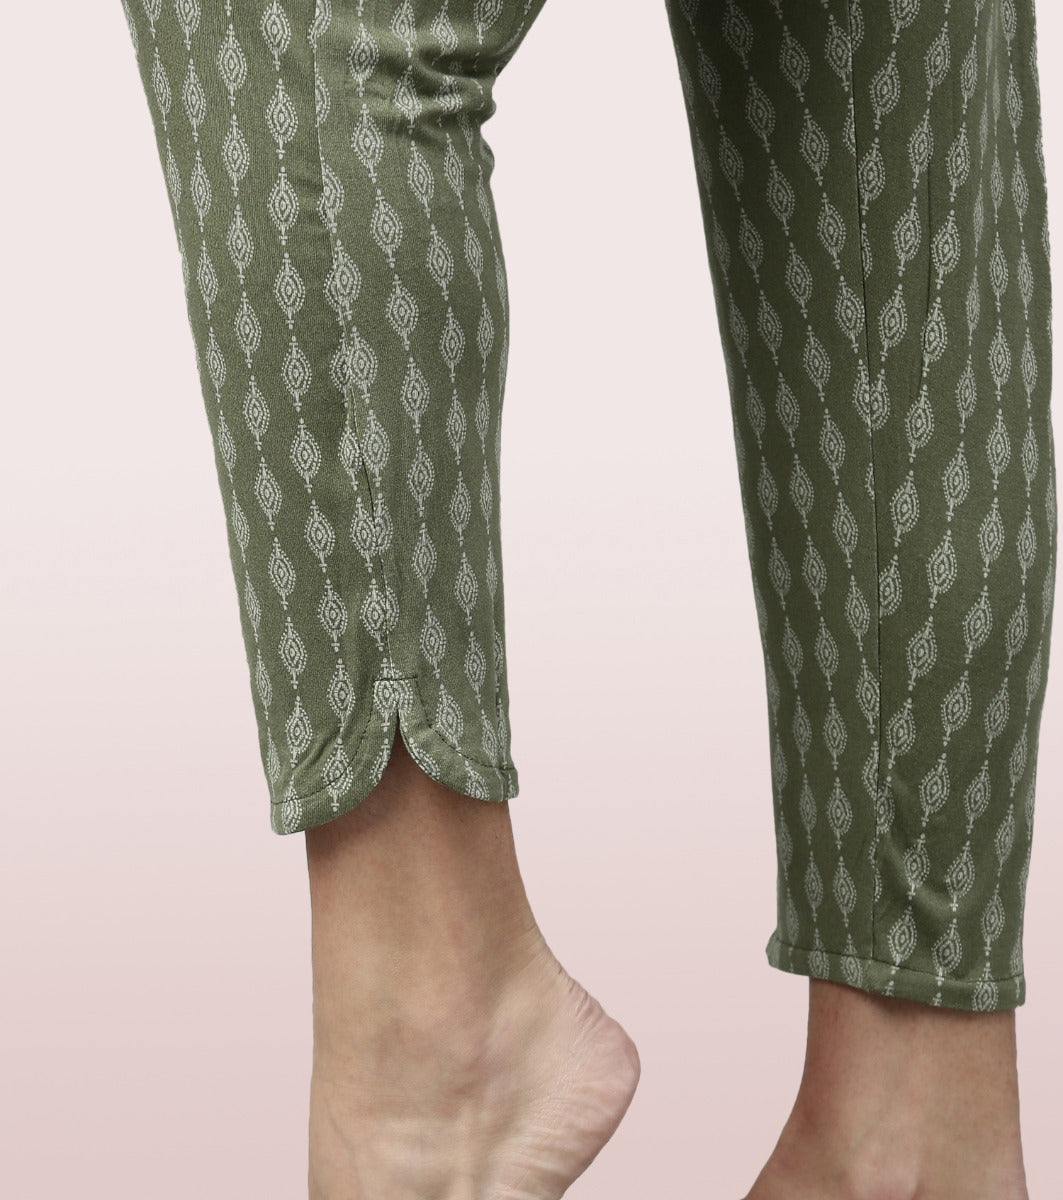 Shop-In Pants - Tapered Lounge Pants With Self Fabric Drawstring With Metal Ends